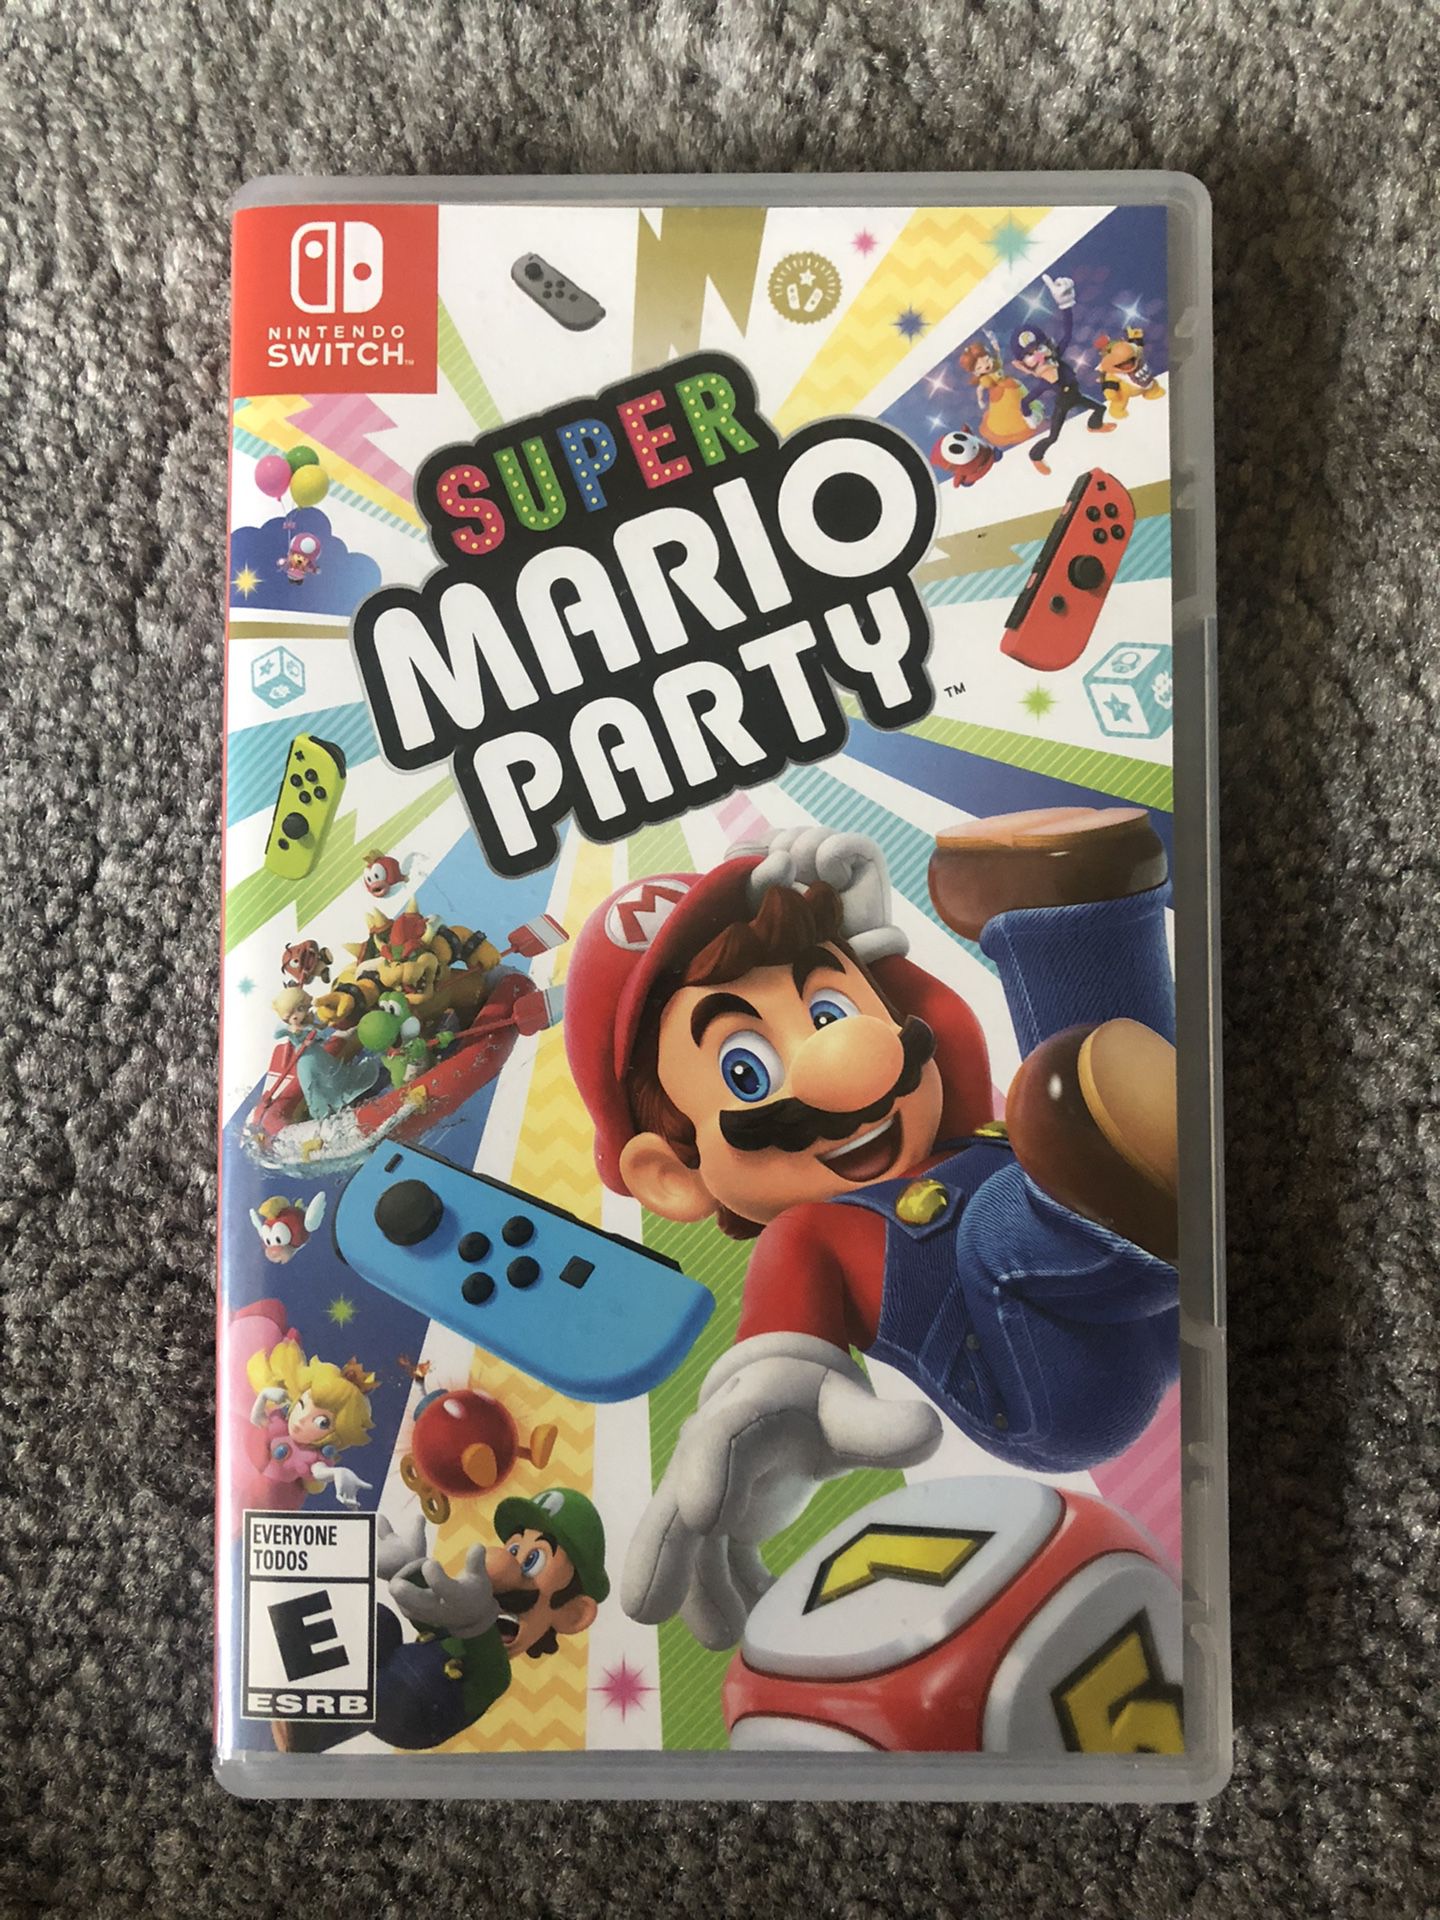 Super Mario Party for Nintendo Switch 